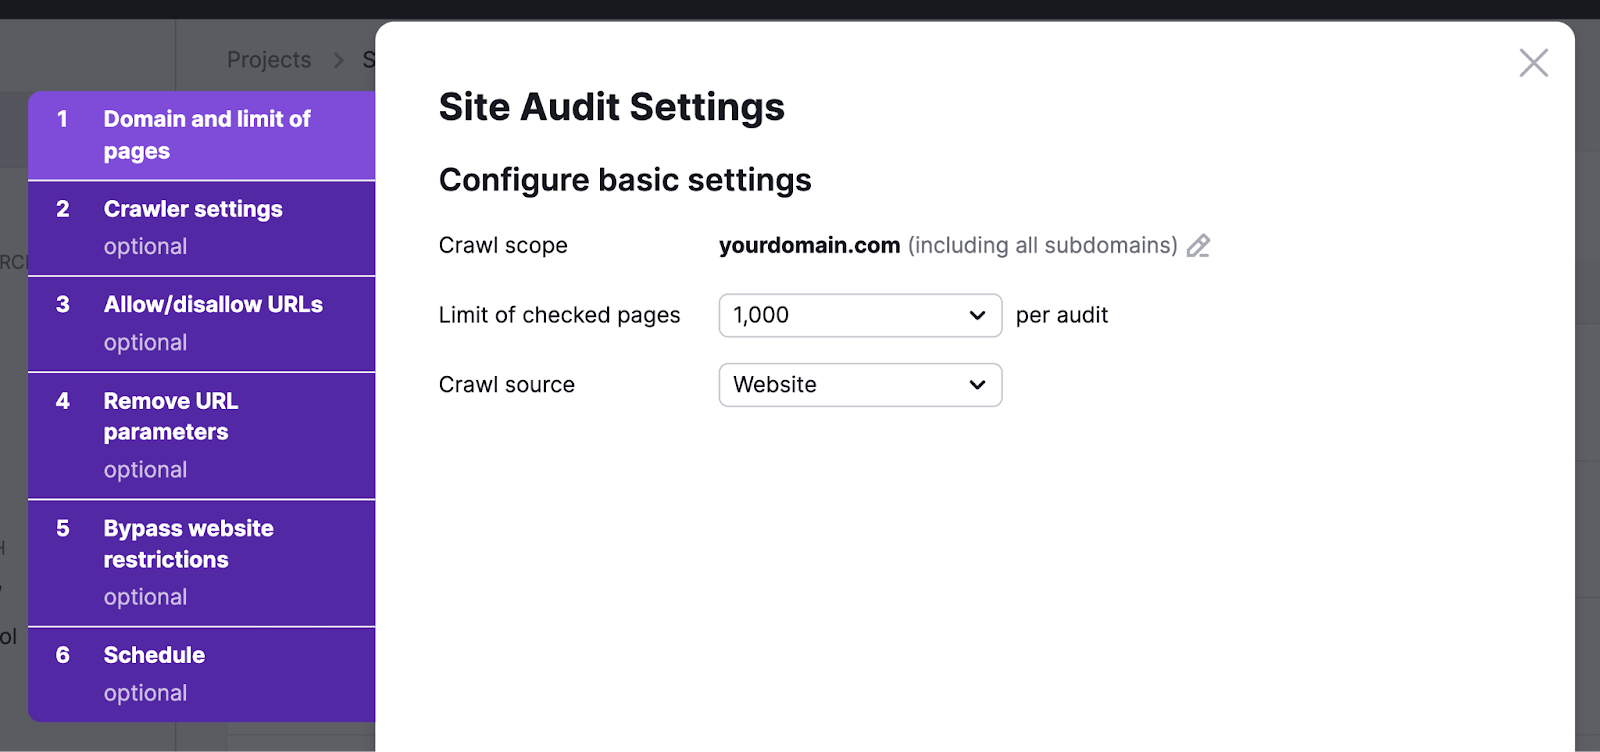 site audit settings popup with crawl scope, number of checked pages, and crawl source